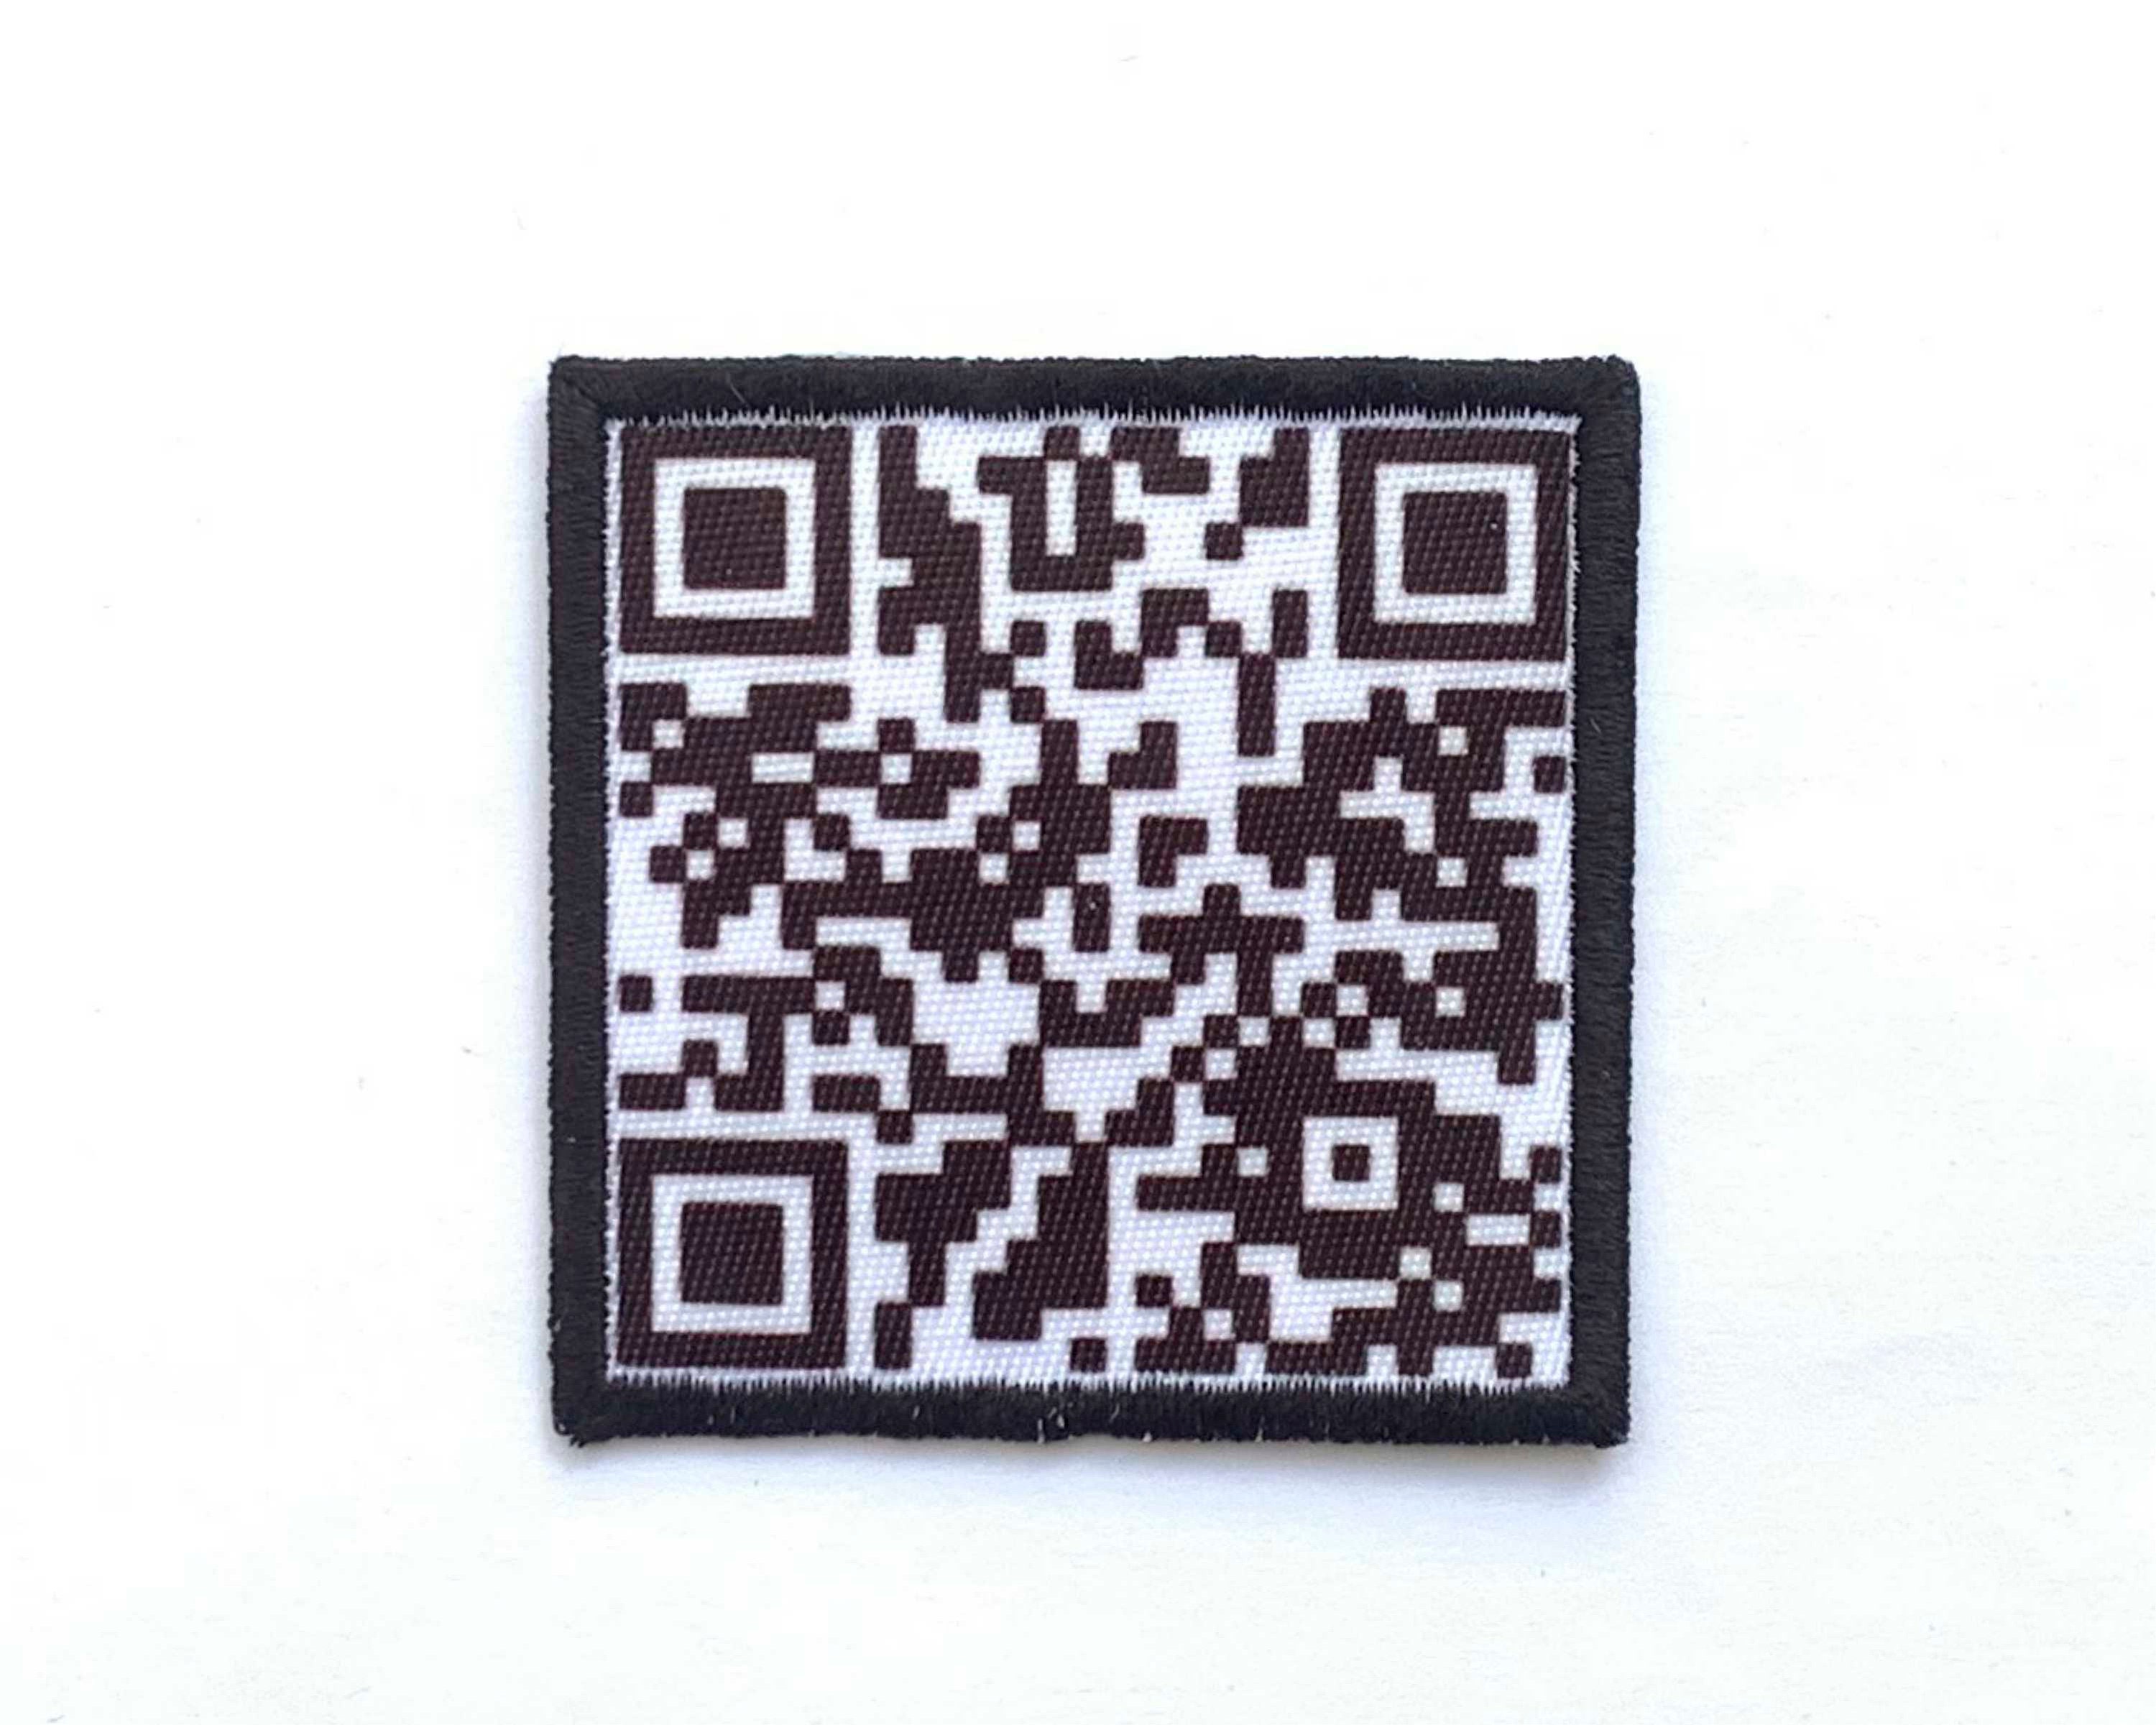 Rick Roll Your Friends! QR code that links to Rick Astley’s “Never Gonna  Give You Up”  music video | iPad Case & Skin